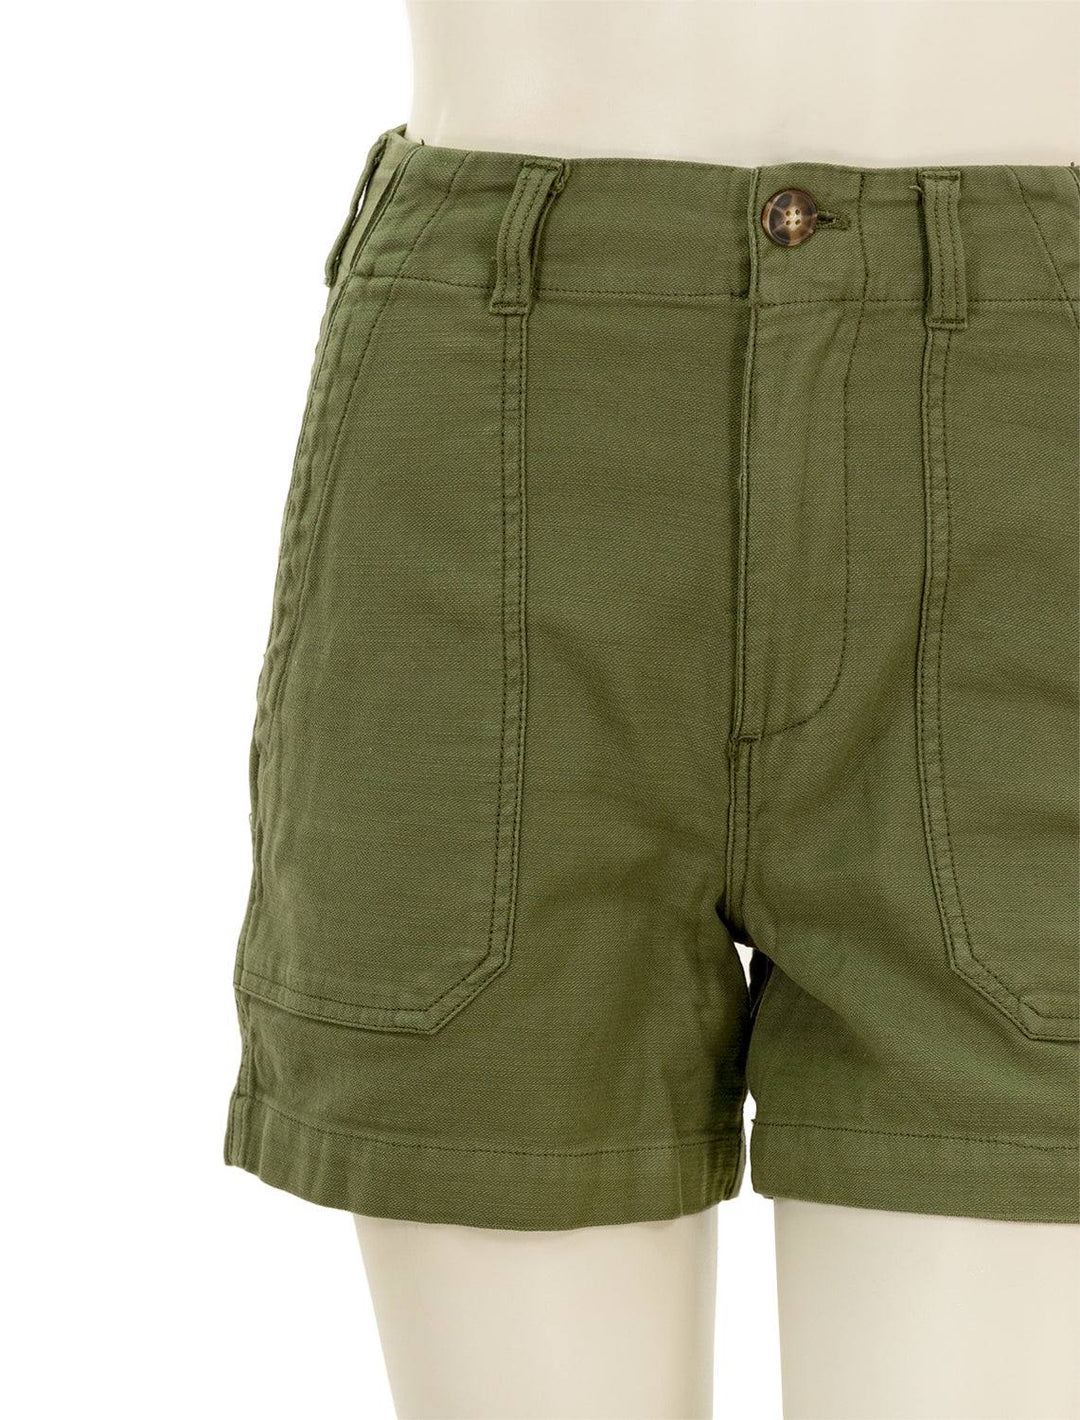 Close-up view of Faherty's stretch surplus short in fatigue.